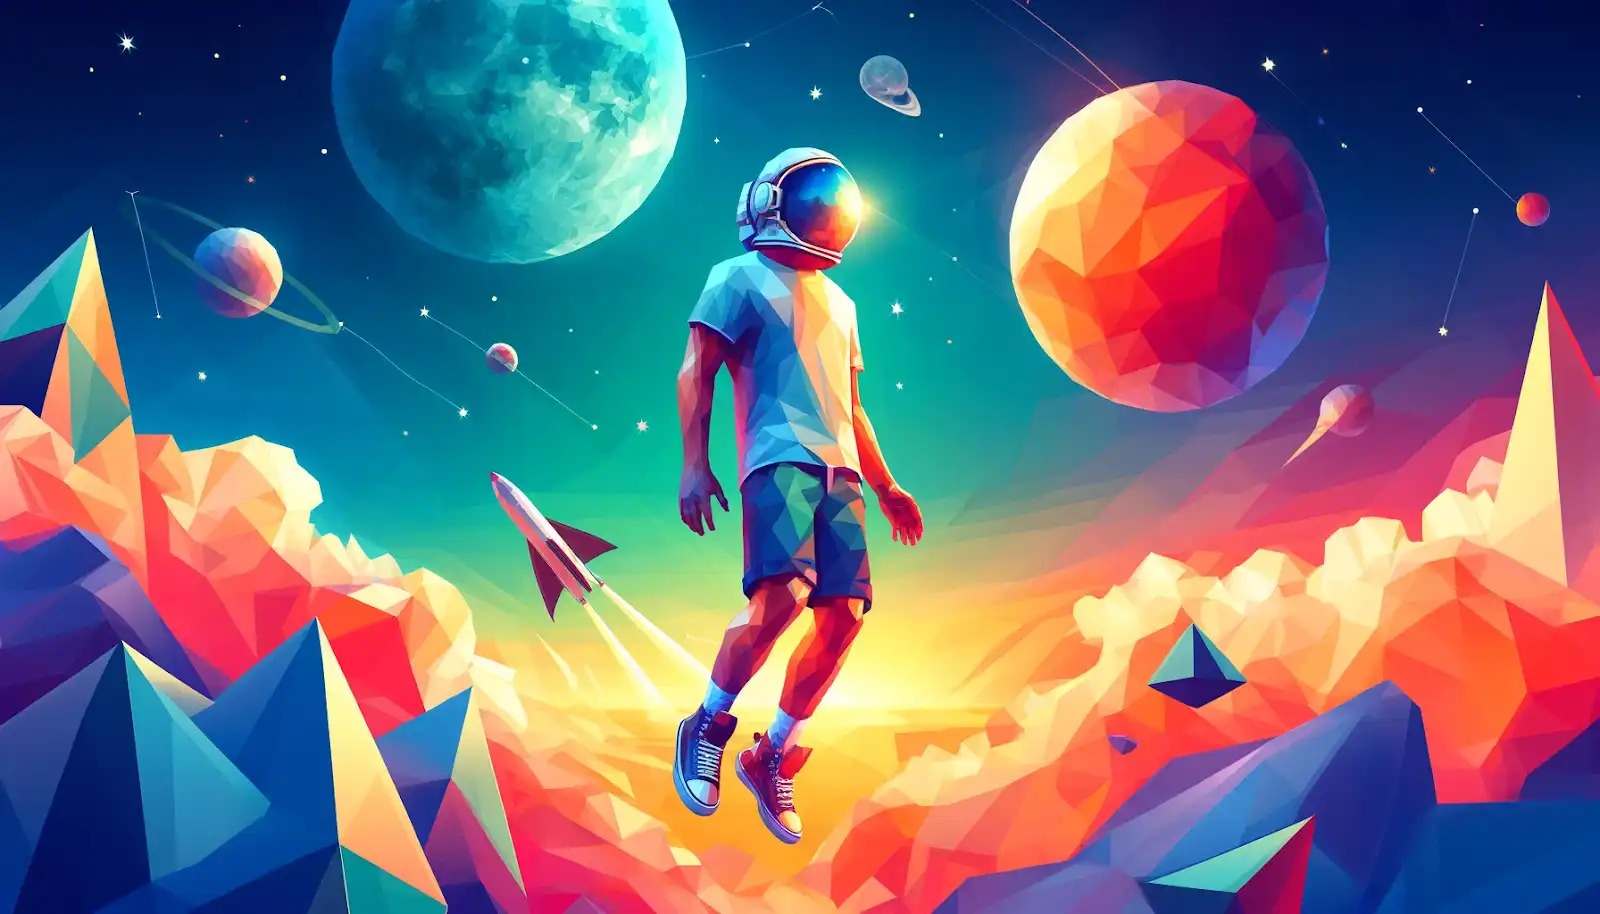 A man in a t-shirt, shorts, sneakers, and an astronaut helmet, floating in the sky with massive planets and the moon in the background.